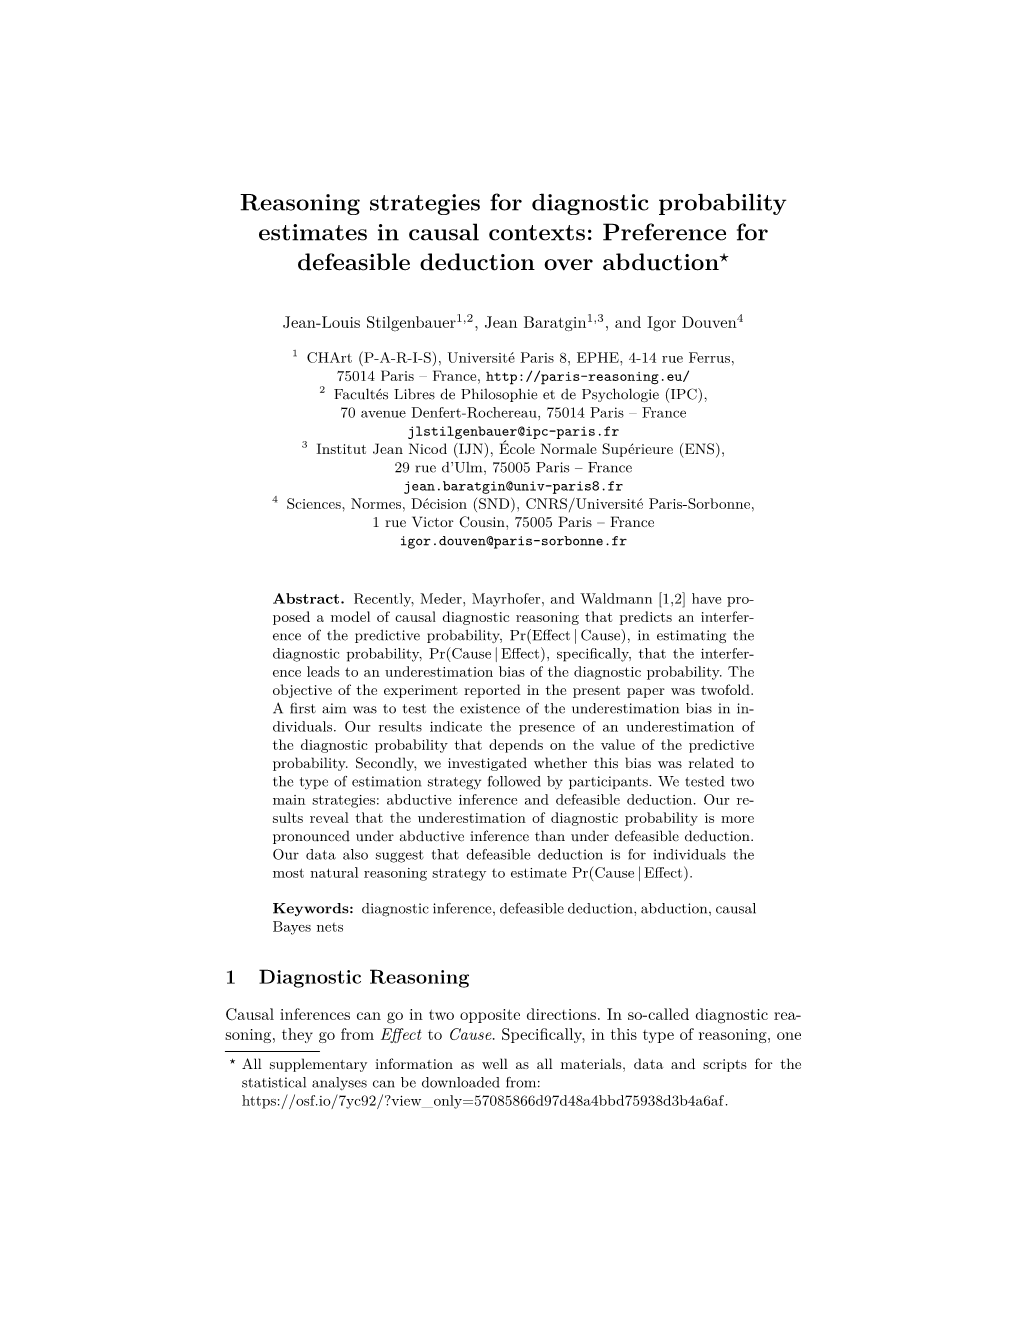 Reasoning Strategies for Diagnostic Probability Estimates in Causal Contexts: Preference for Defeasible Deduction Over Abduction?